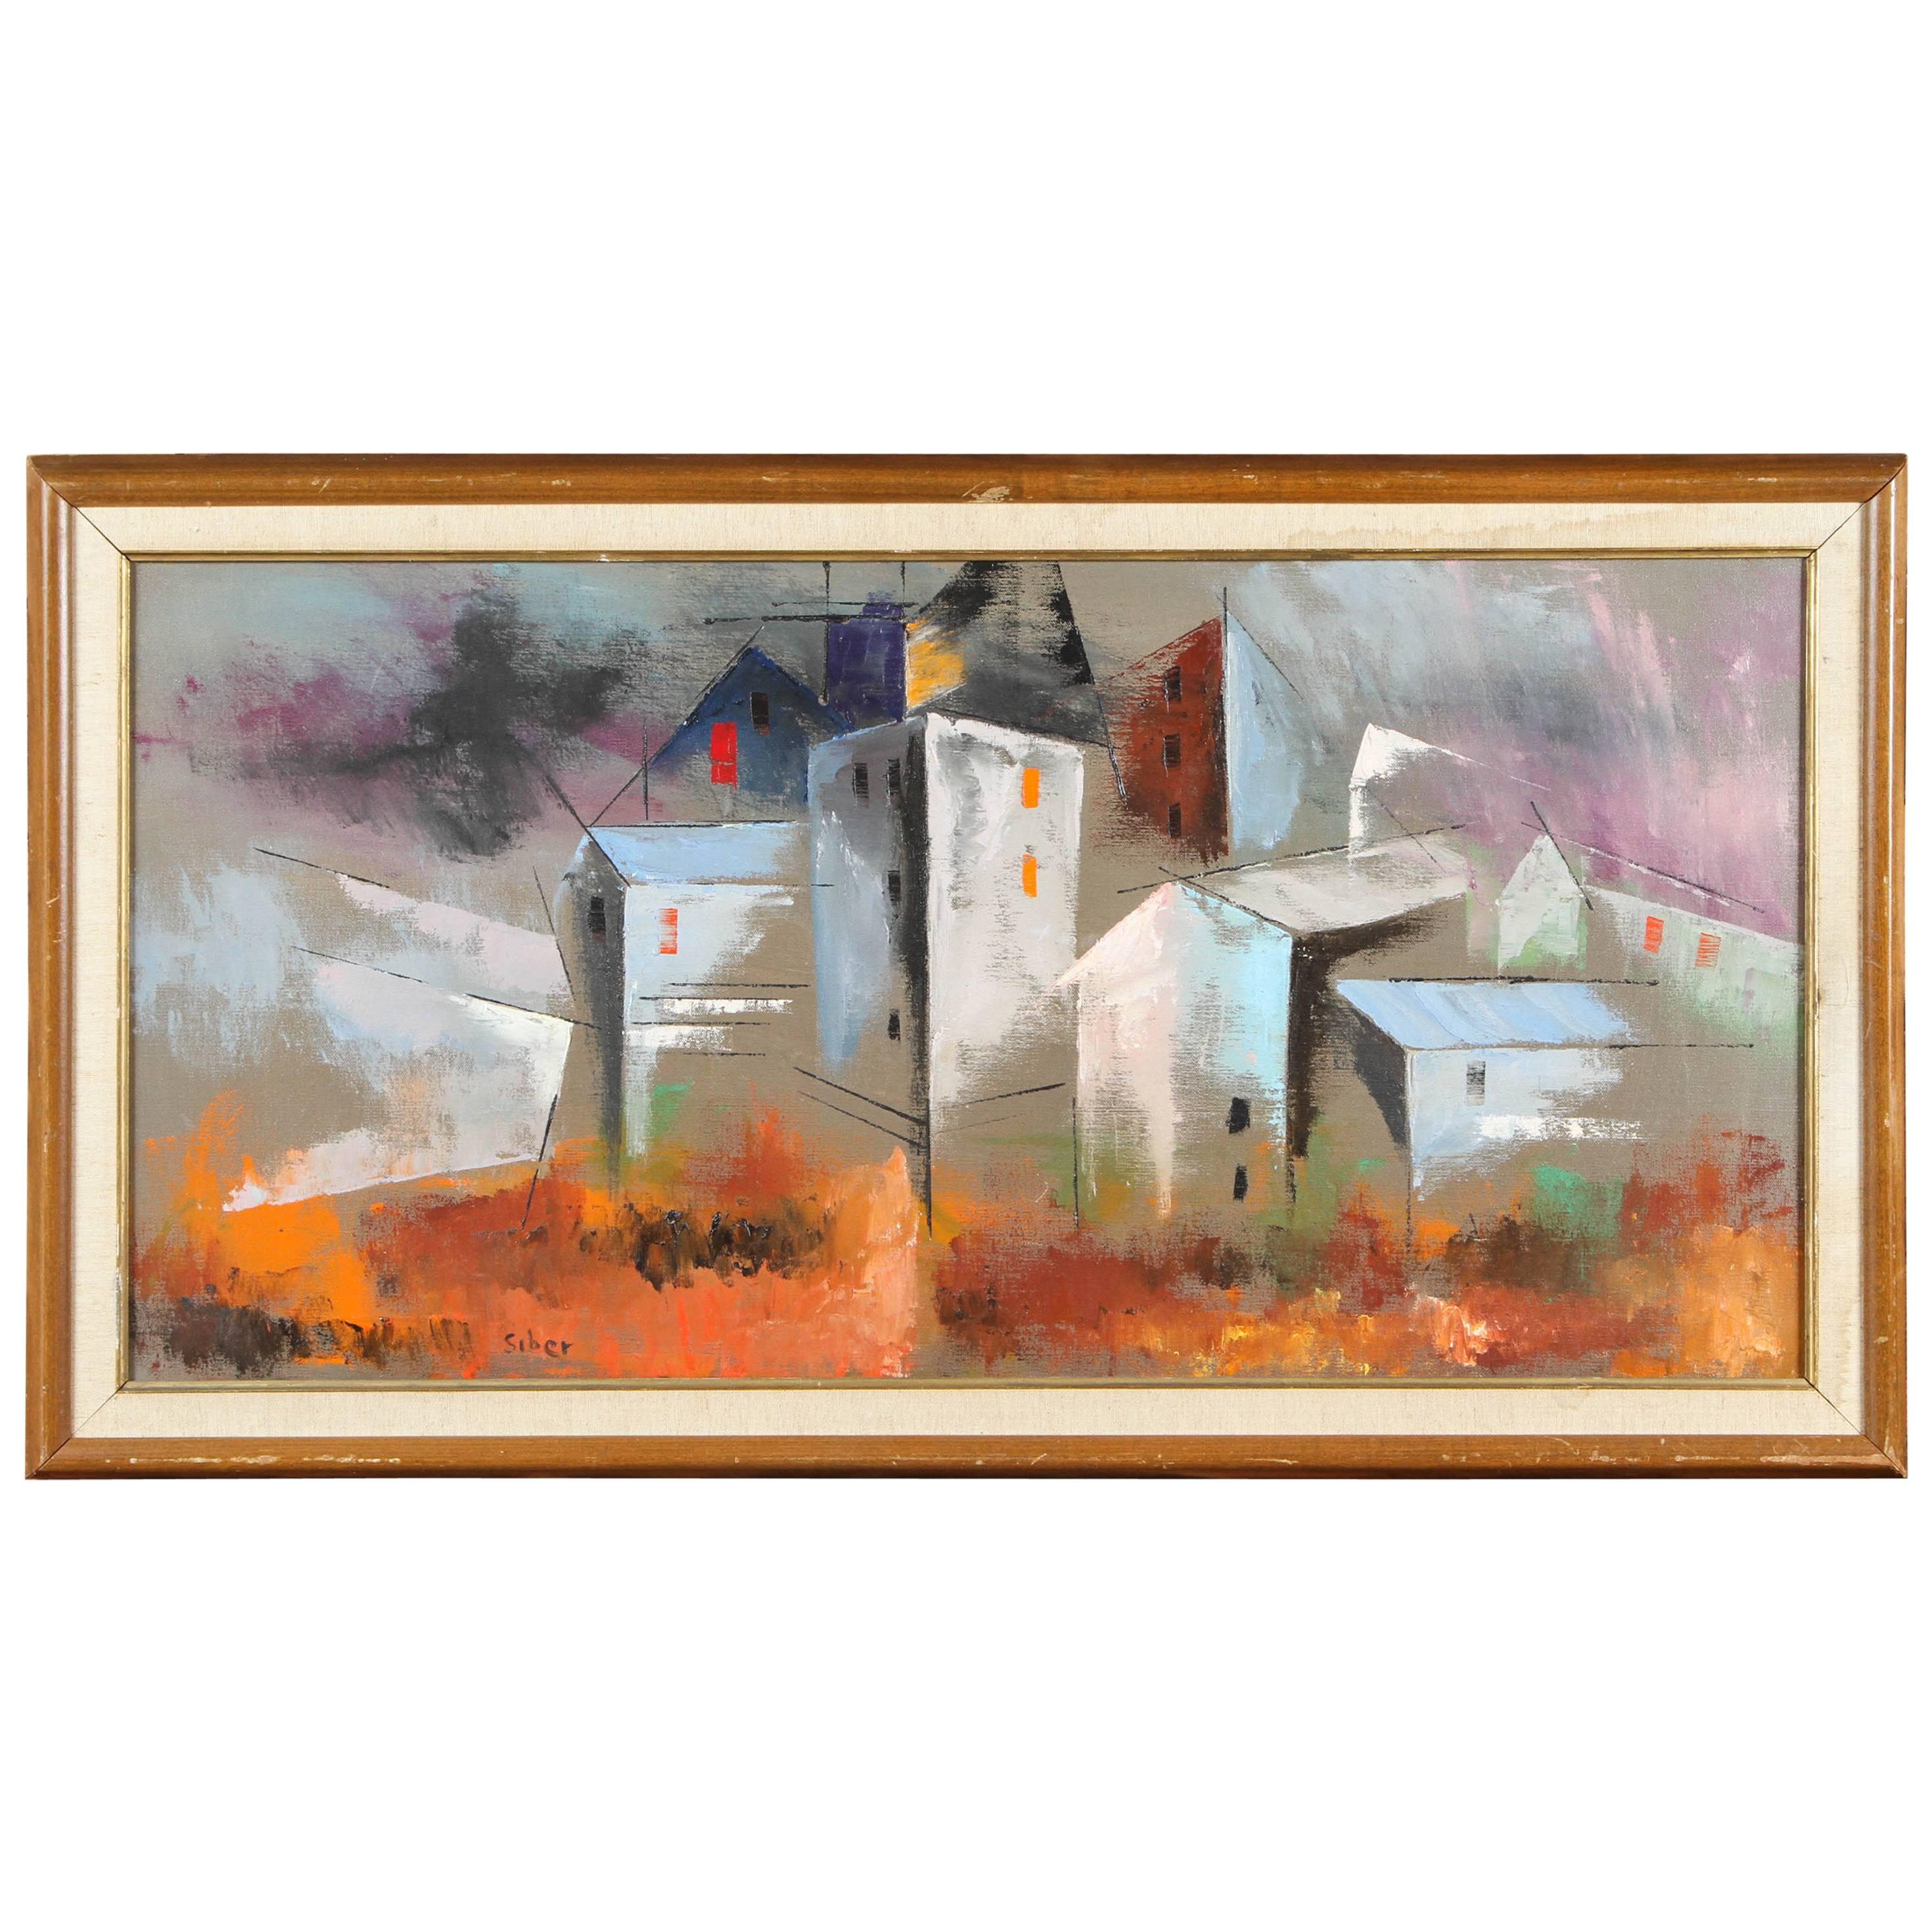 Vintage Cubist Architectual Oil Painting by Siber For Sale